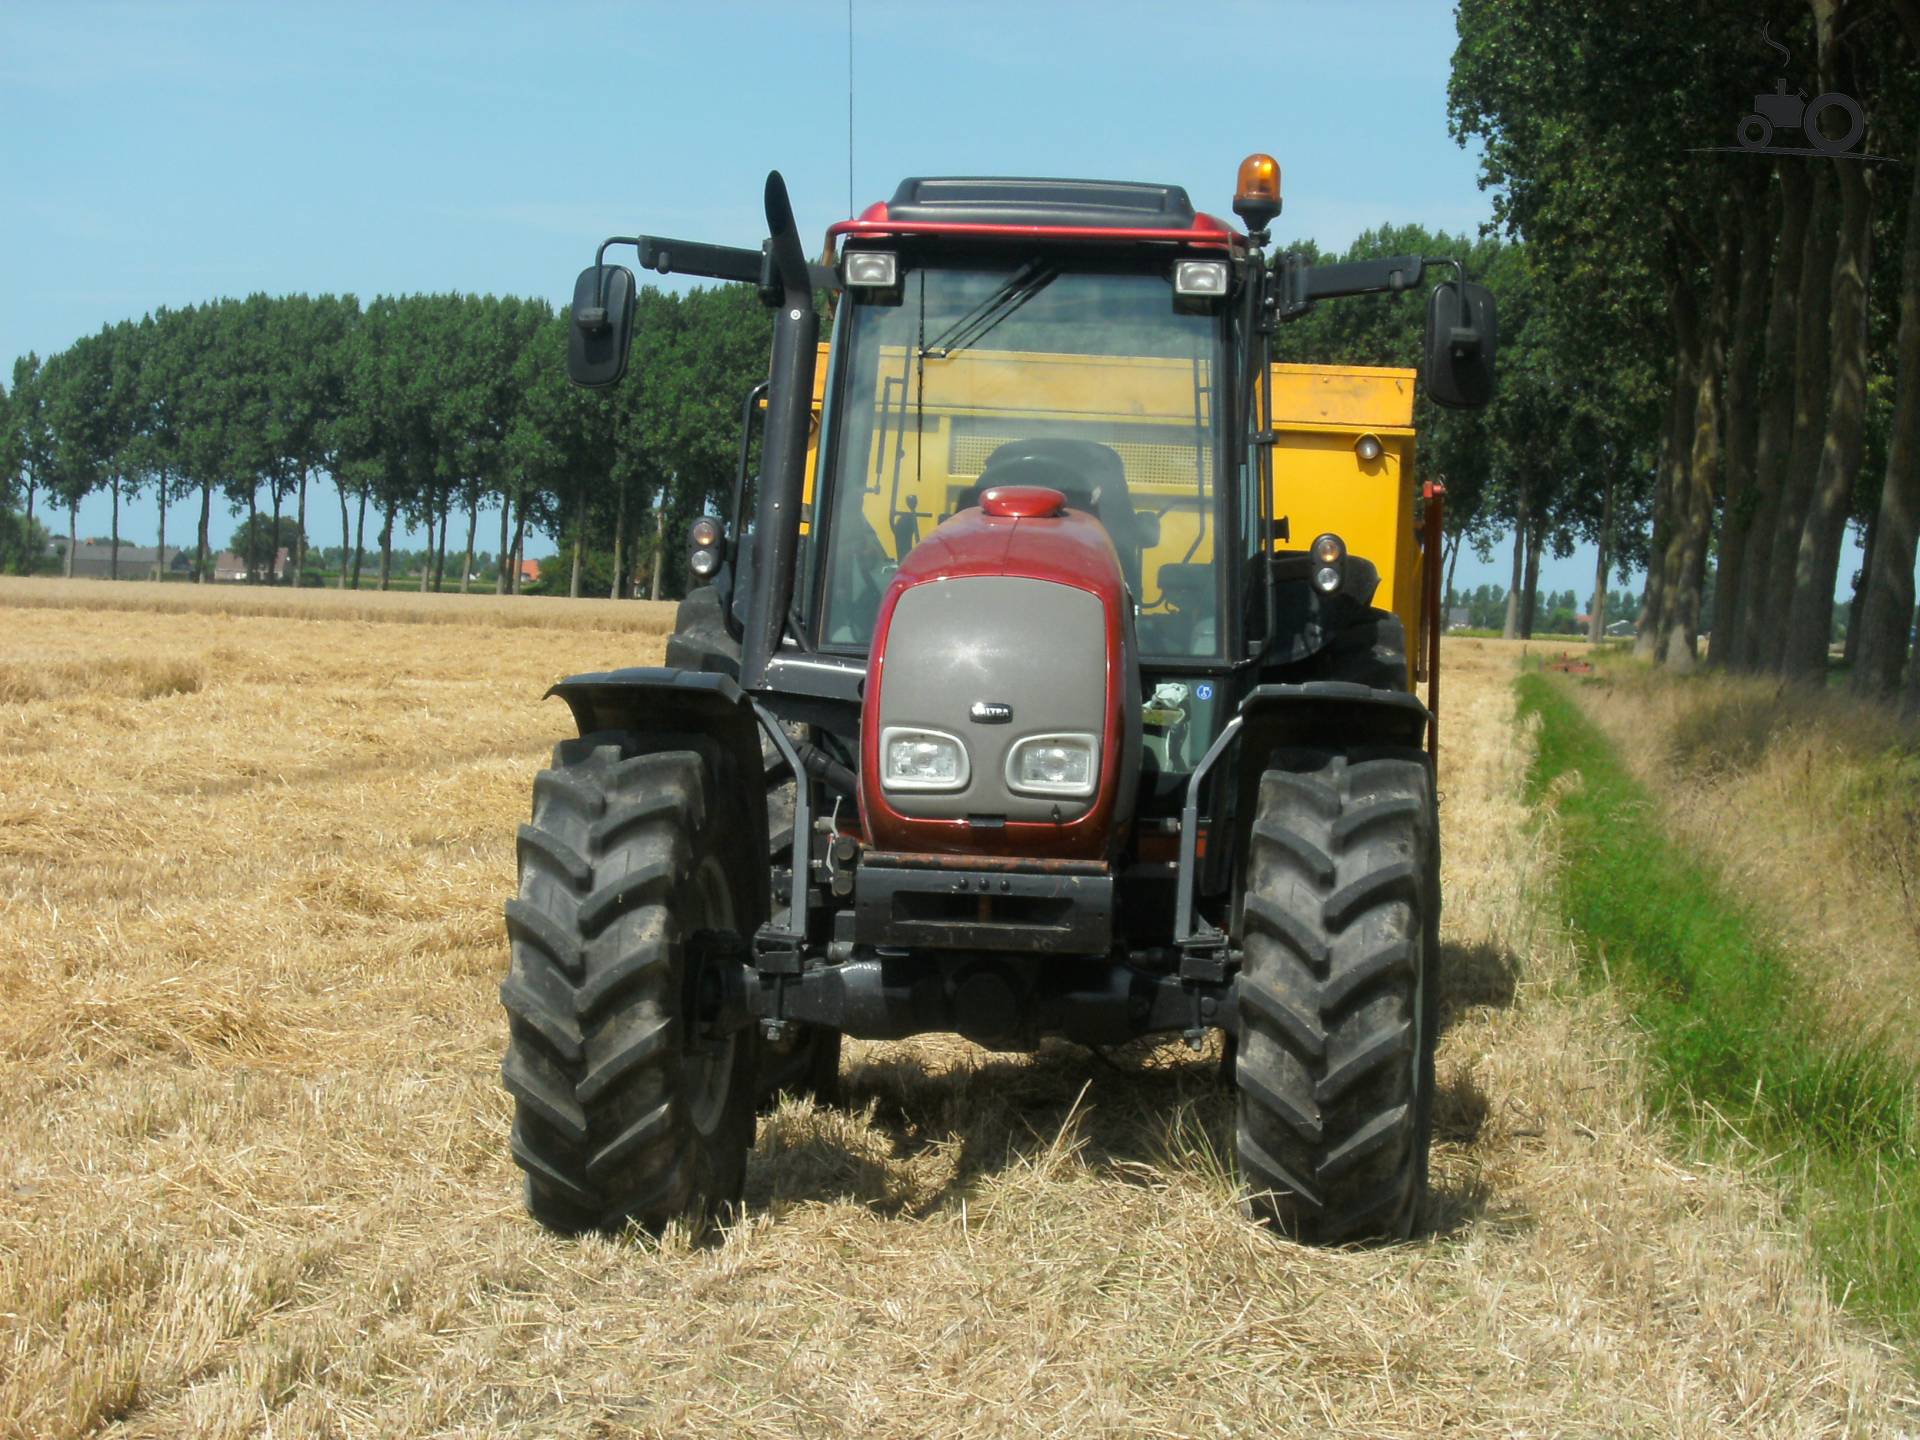 valtra a95 - group picture, image by tag - keywordpictures.com